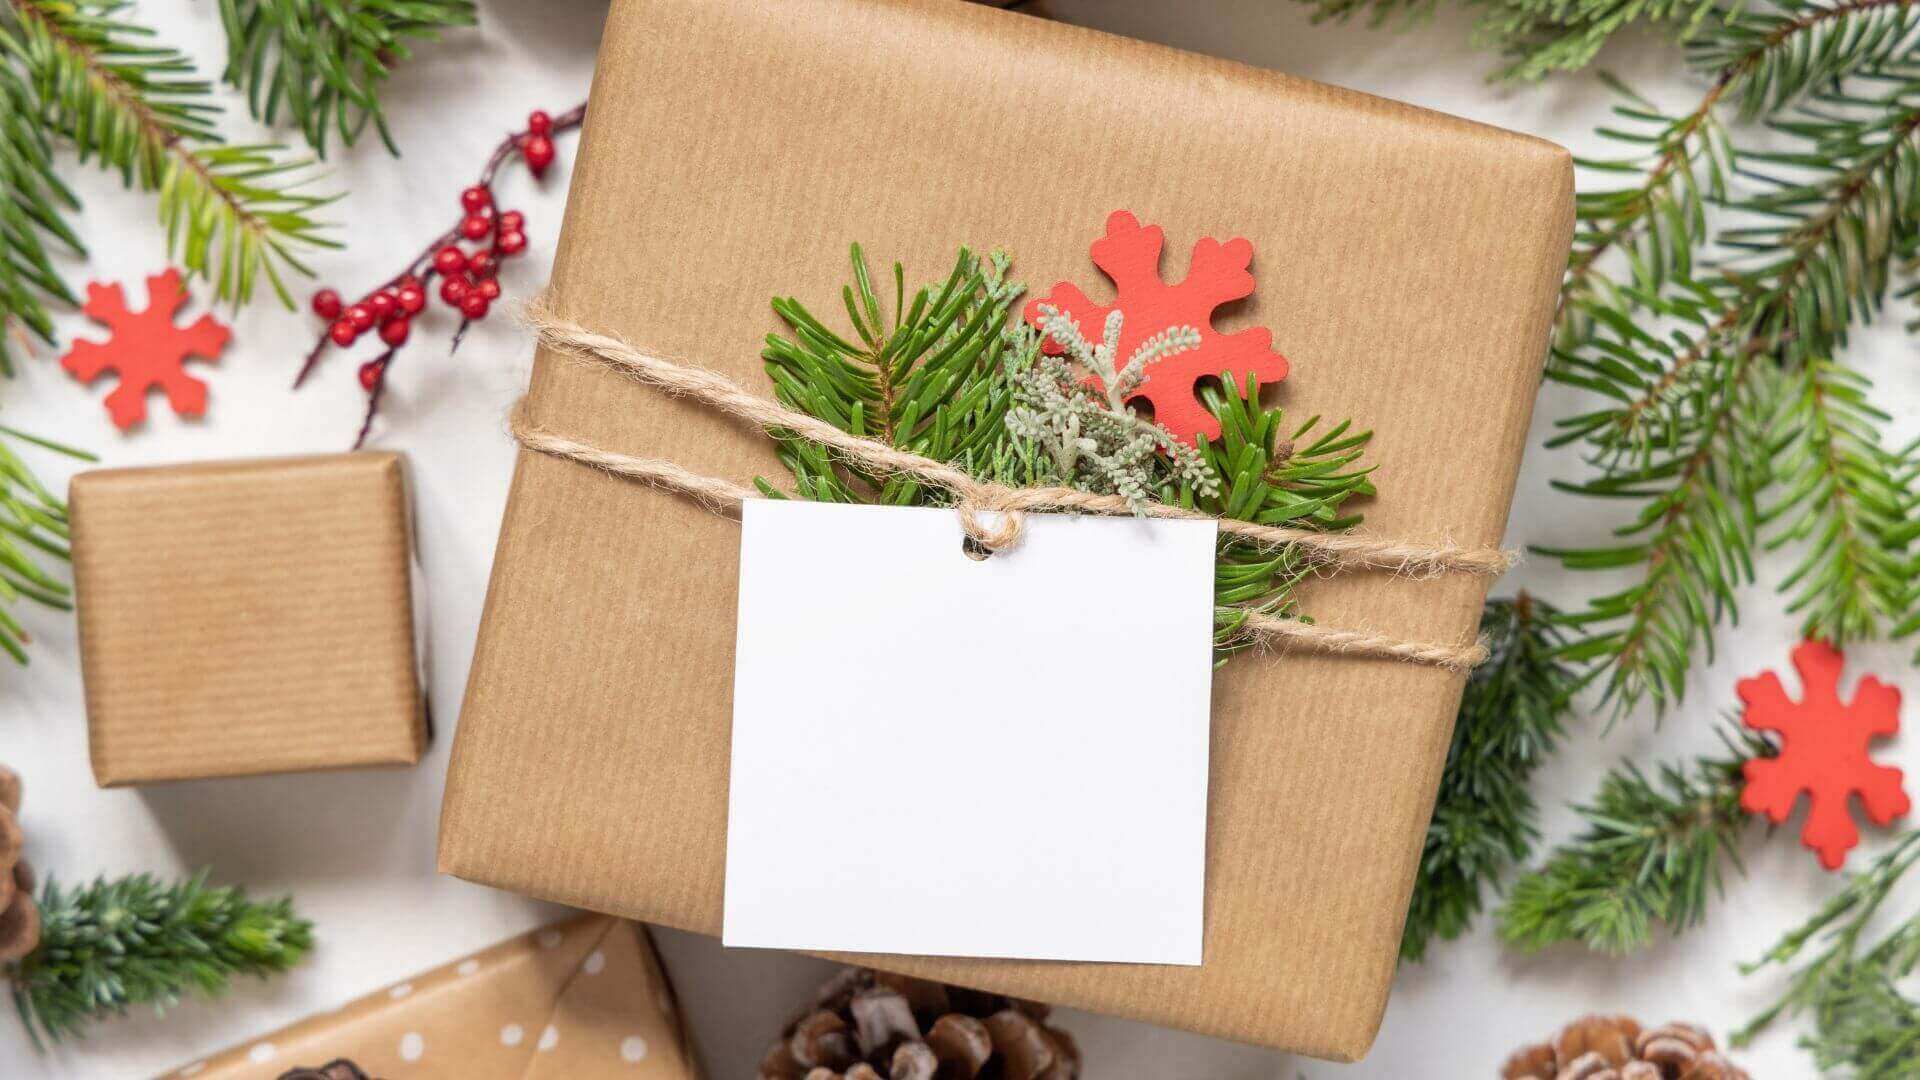 Collombatti Naturals 5 ways to reduce waste over christmas picture of plastic free gift wrapping